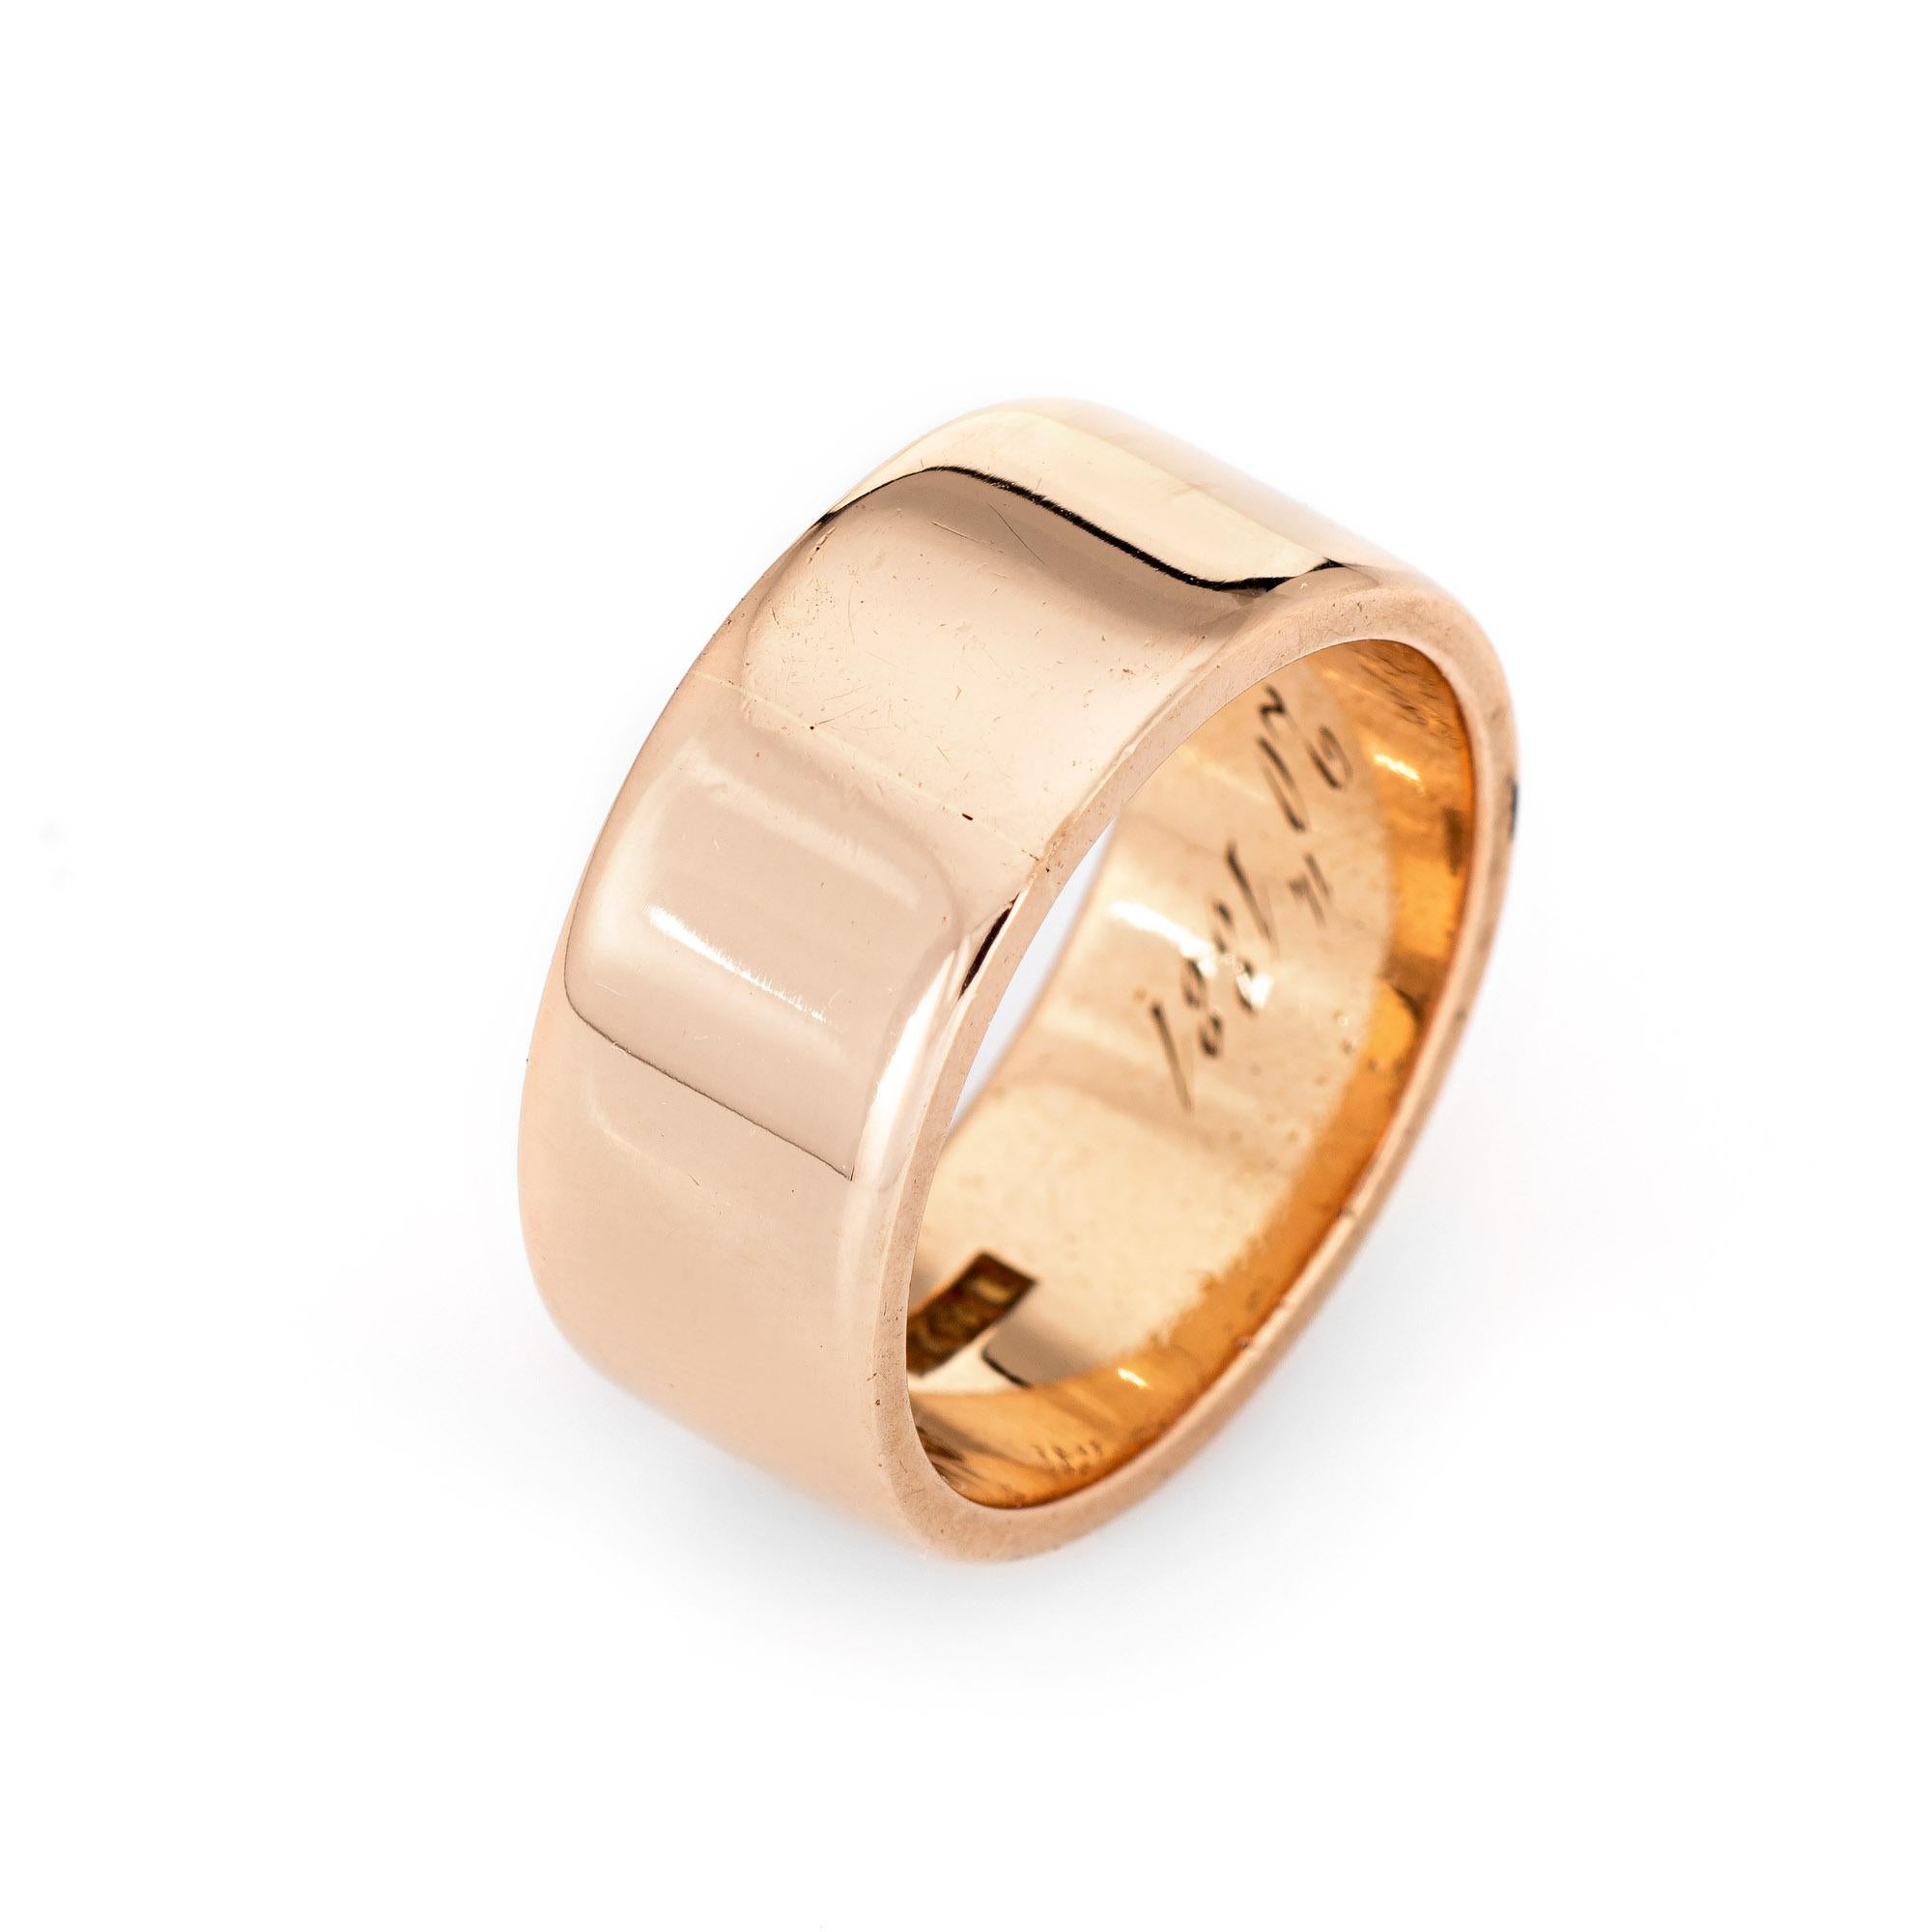 Elegant antique Victorian wedding band (circa 1880s to 1900s) crafted in 18 karat rose gold. 

The wedding band is wider, measuring 8.5mm (0.33 inches). The inner band is engraved 